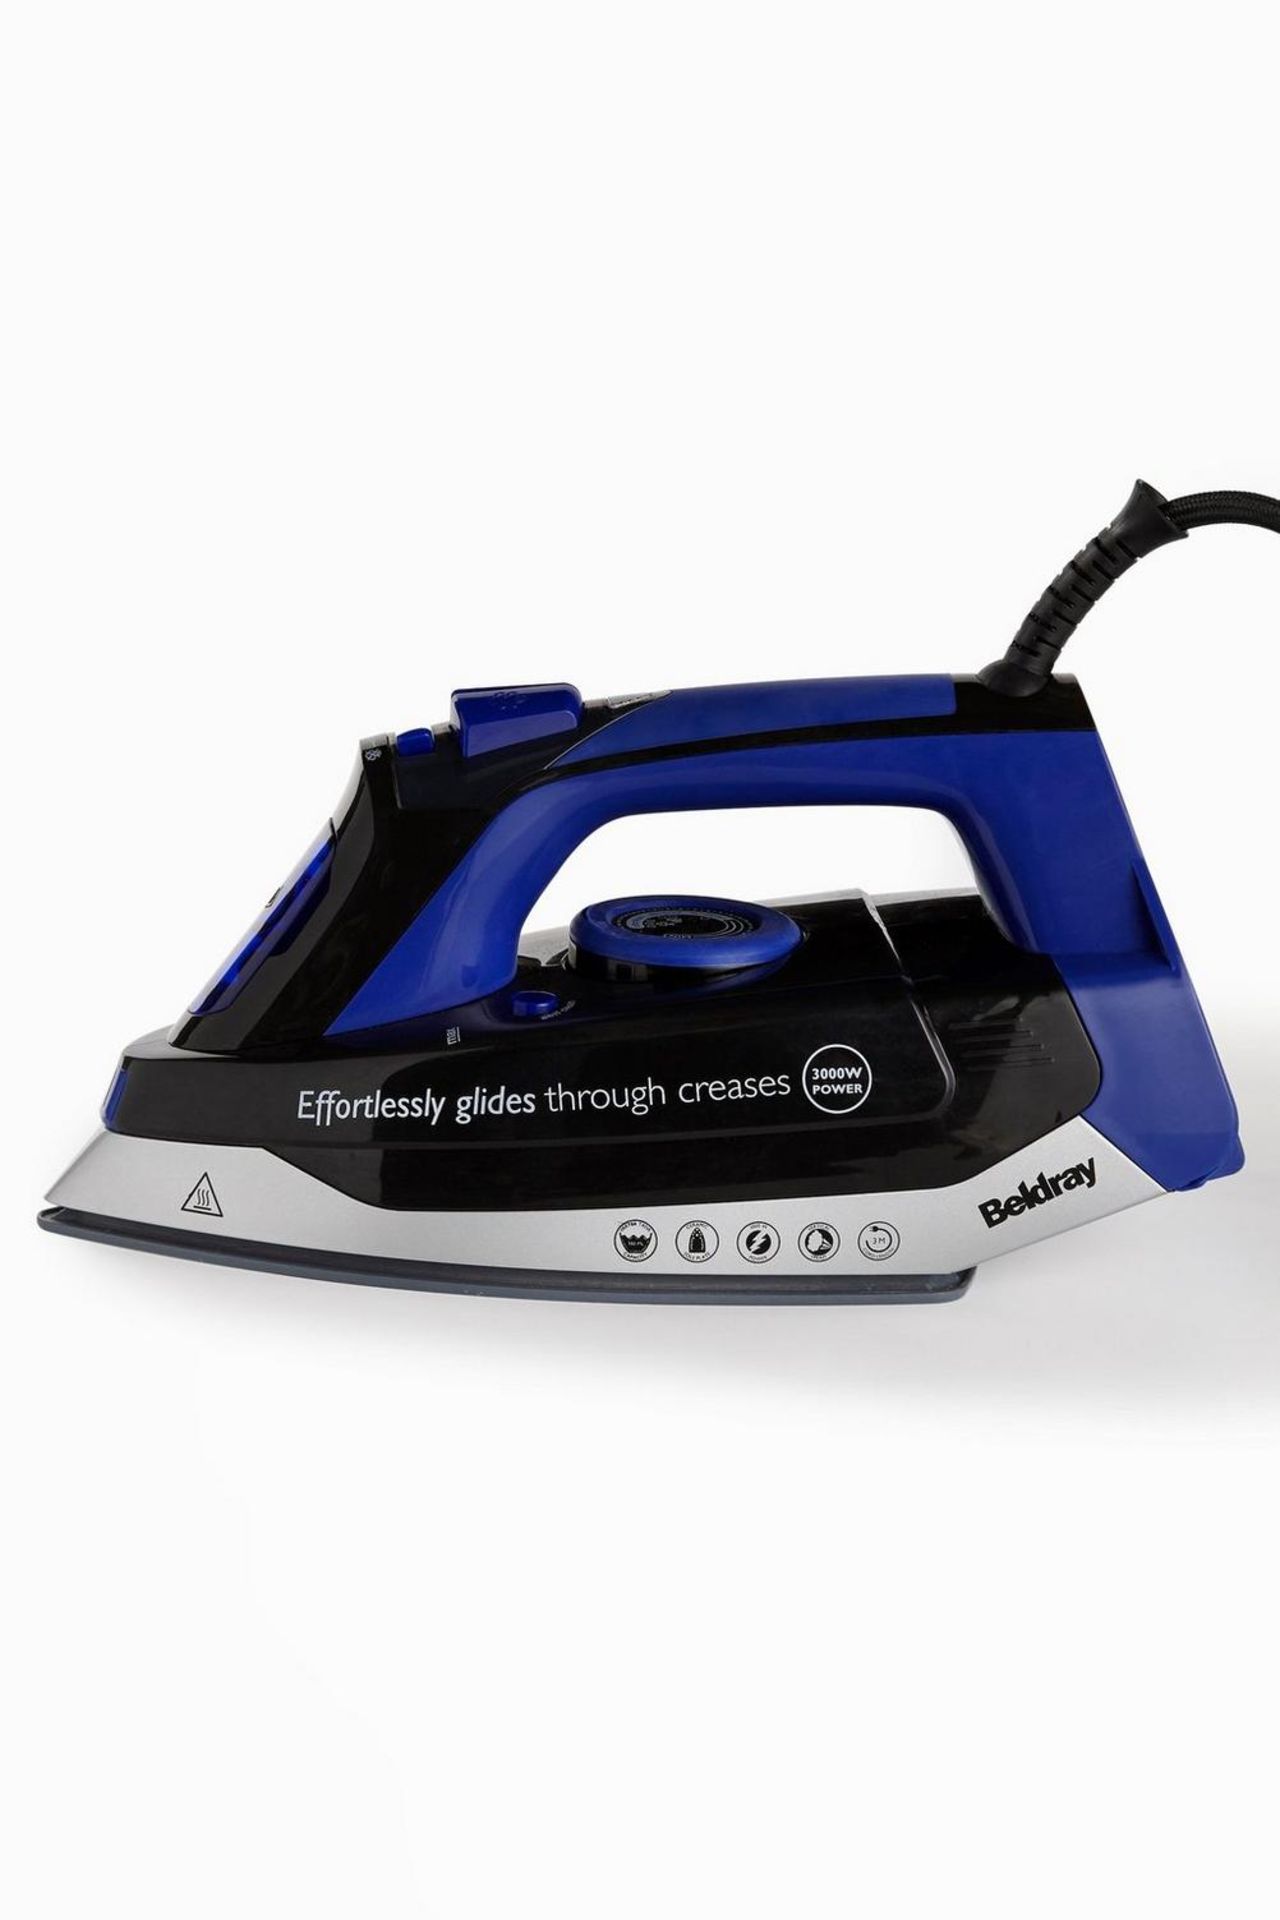 1 BOXED BELDRAY 3000W STEAM IRON (VIEWING AVAILABLE)